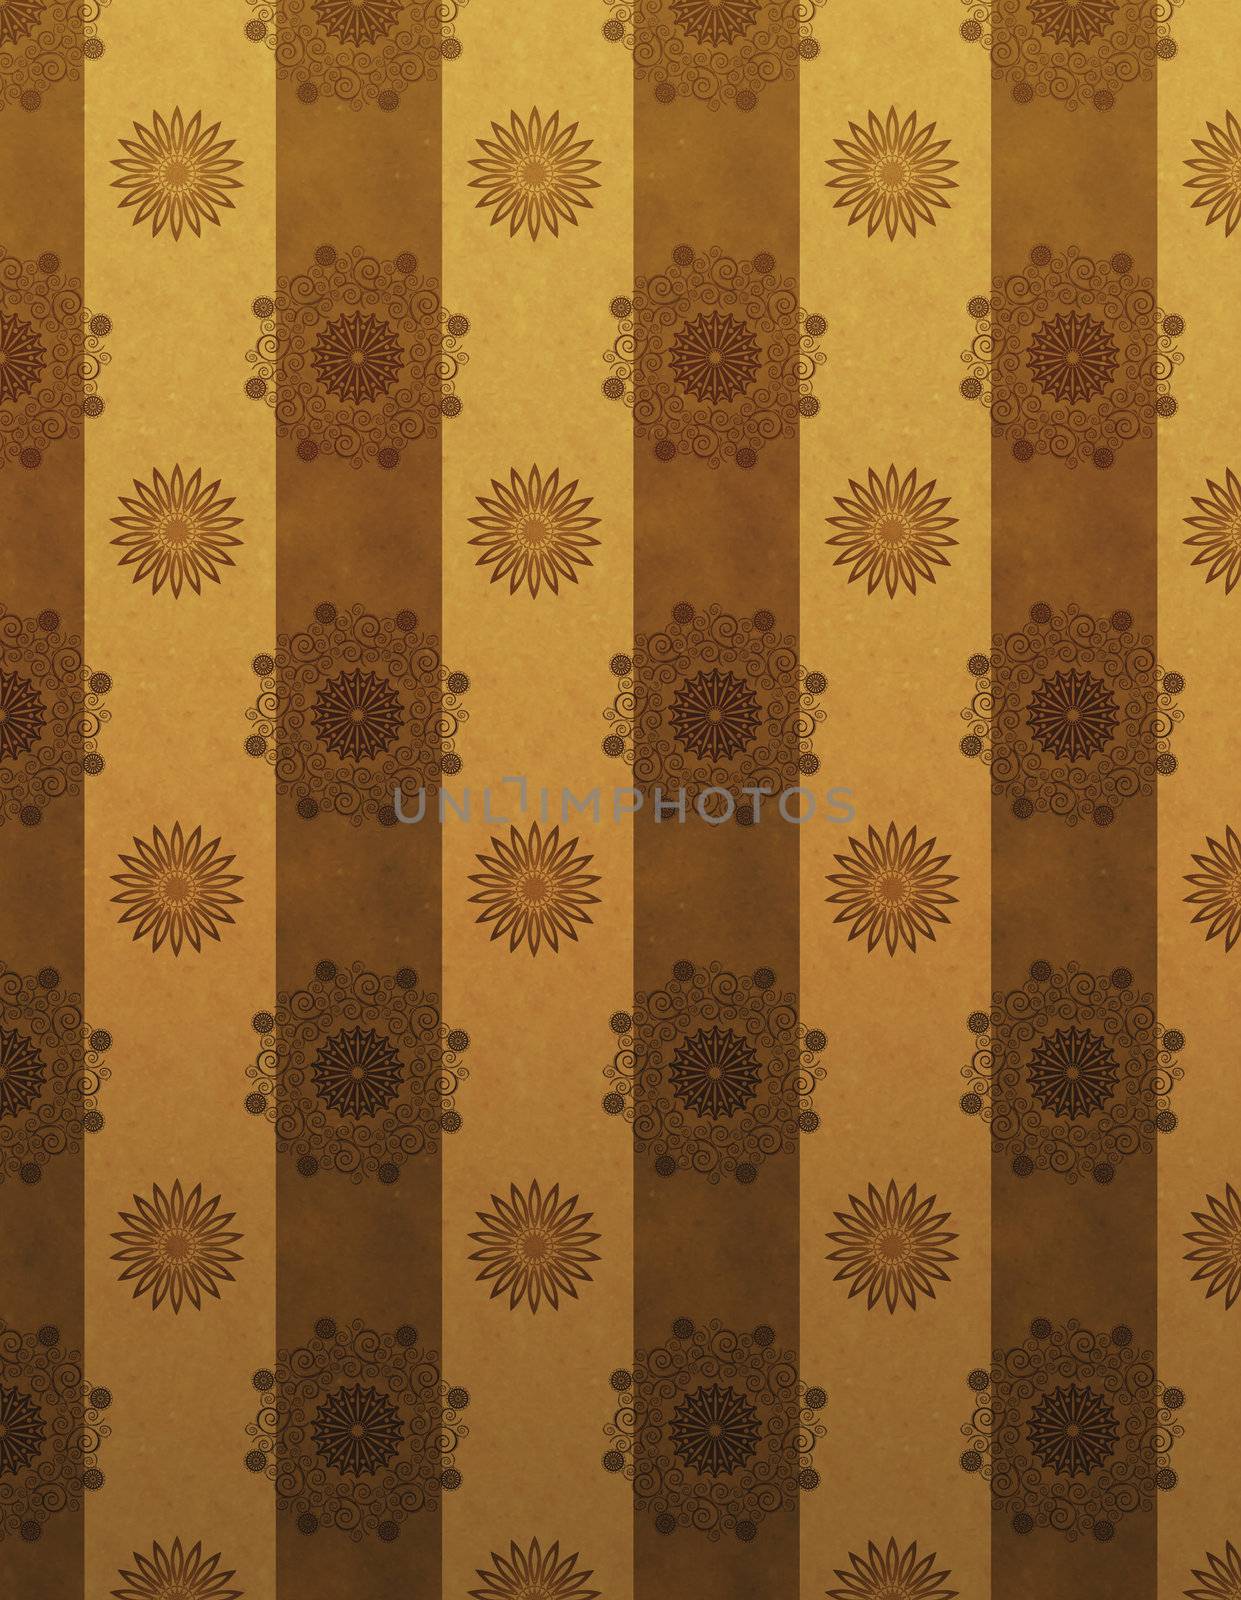 Gold and brown retro wallpaper pattern by charlotteLake